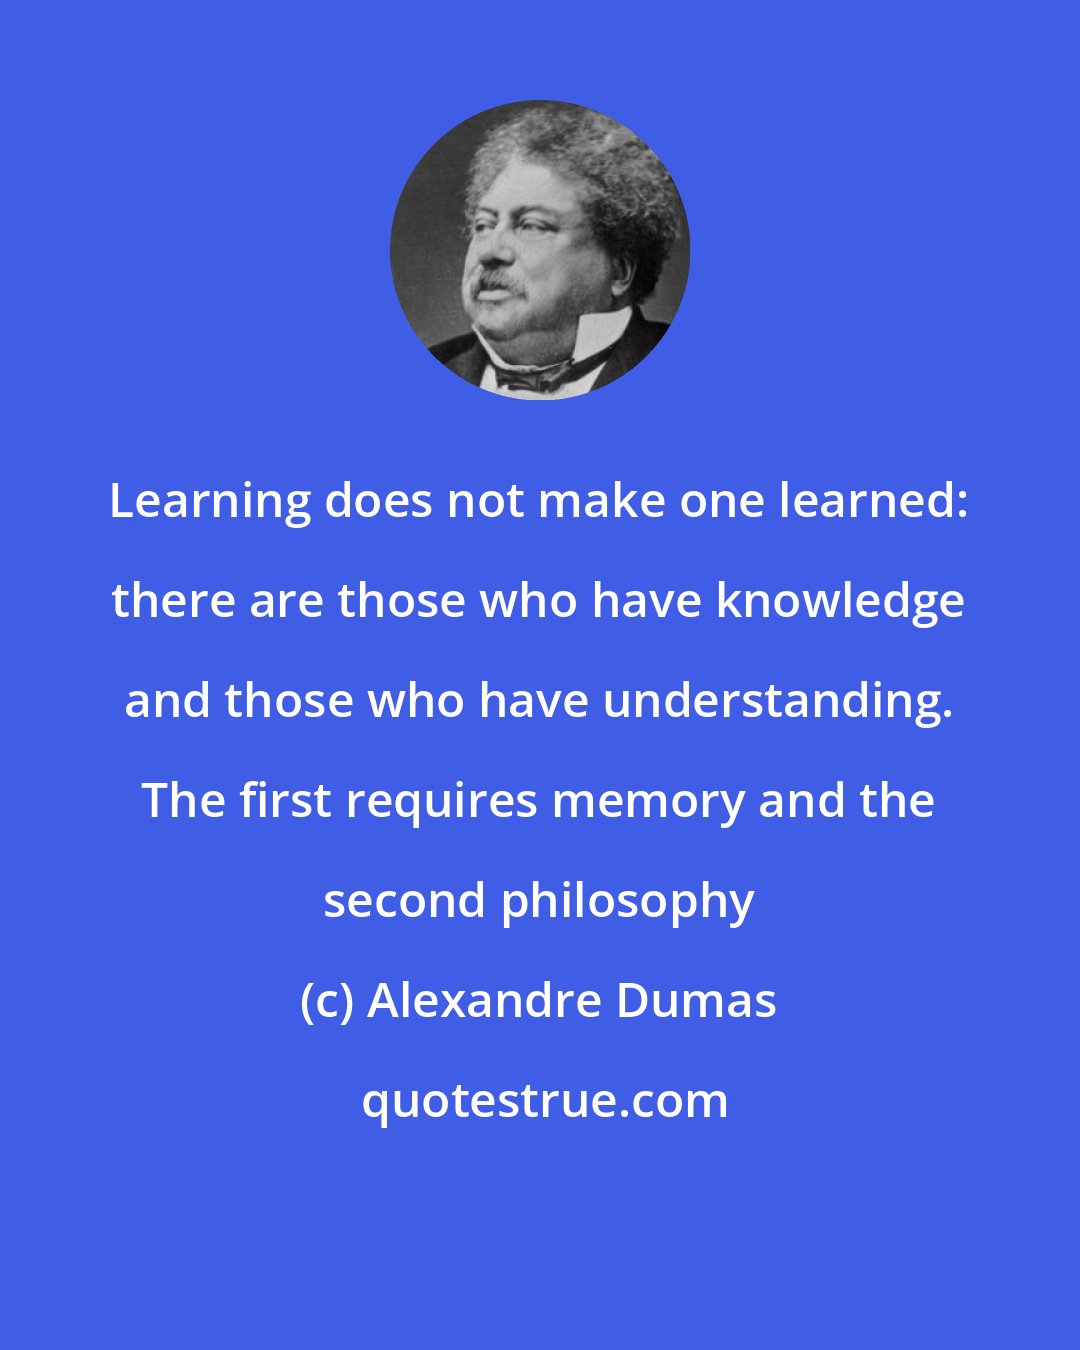 Alexandre Dumas: Learning does not make one learned: there are those who have knowledge and those who have understanding. The first requires memory and the second philosophy